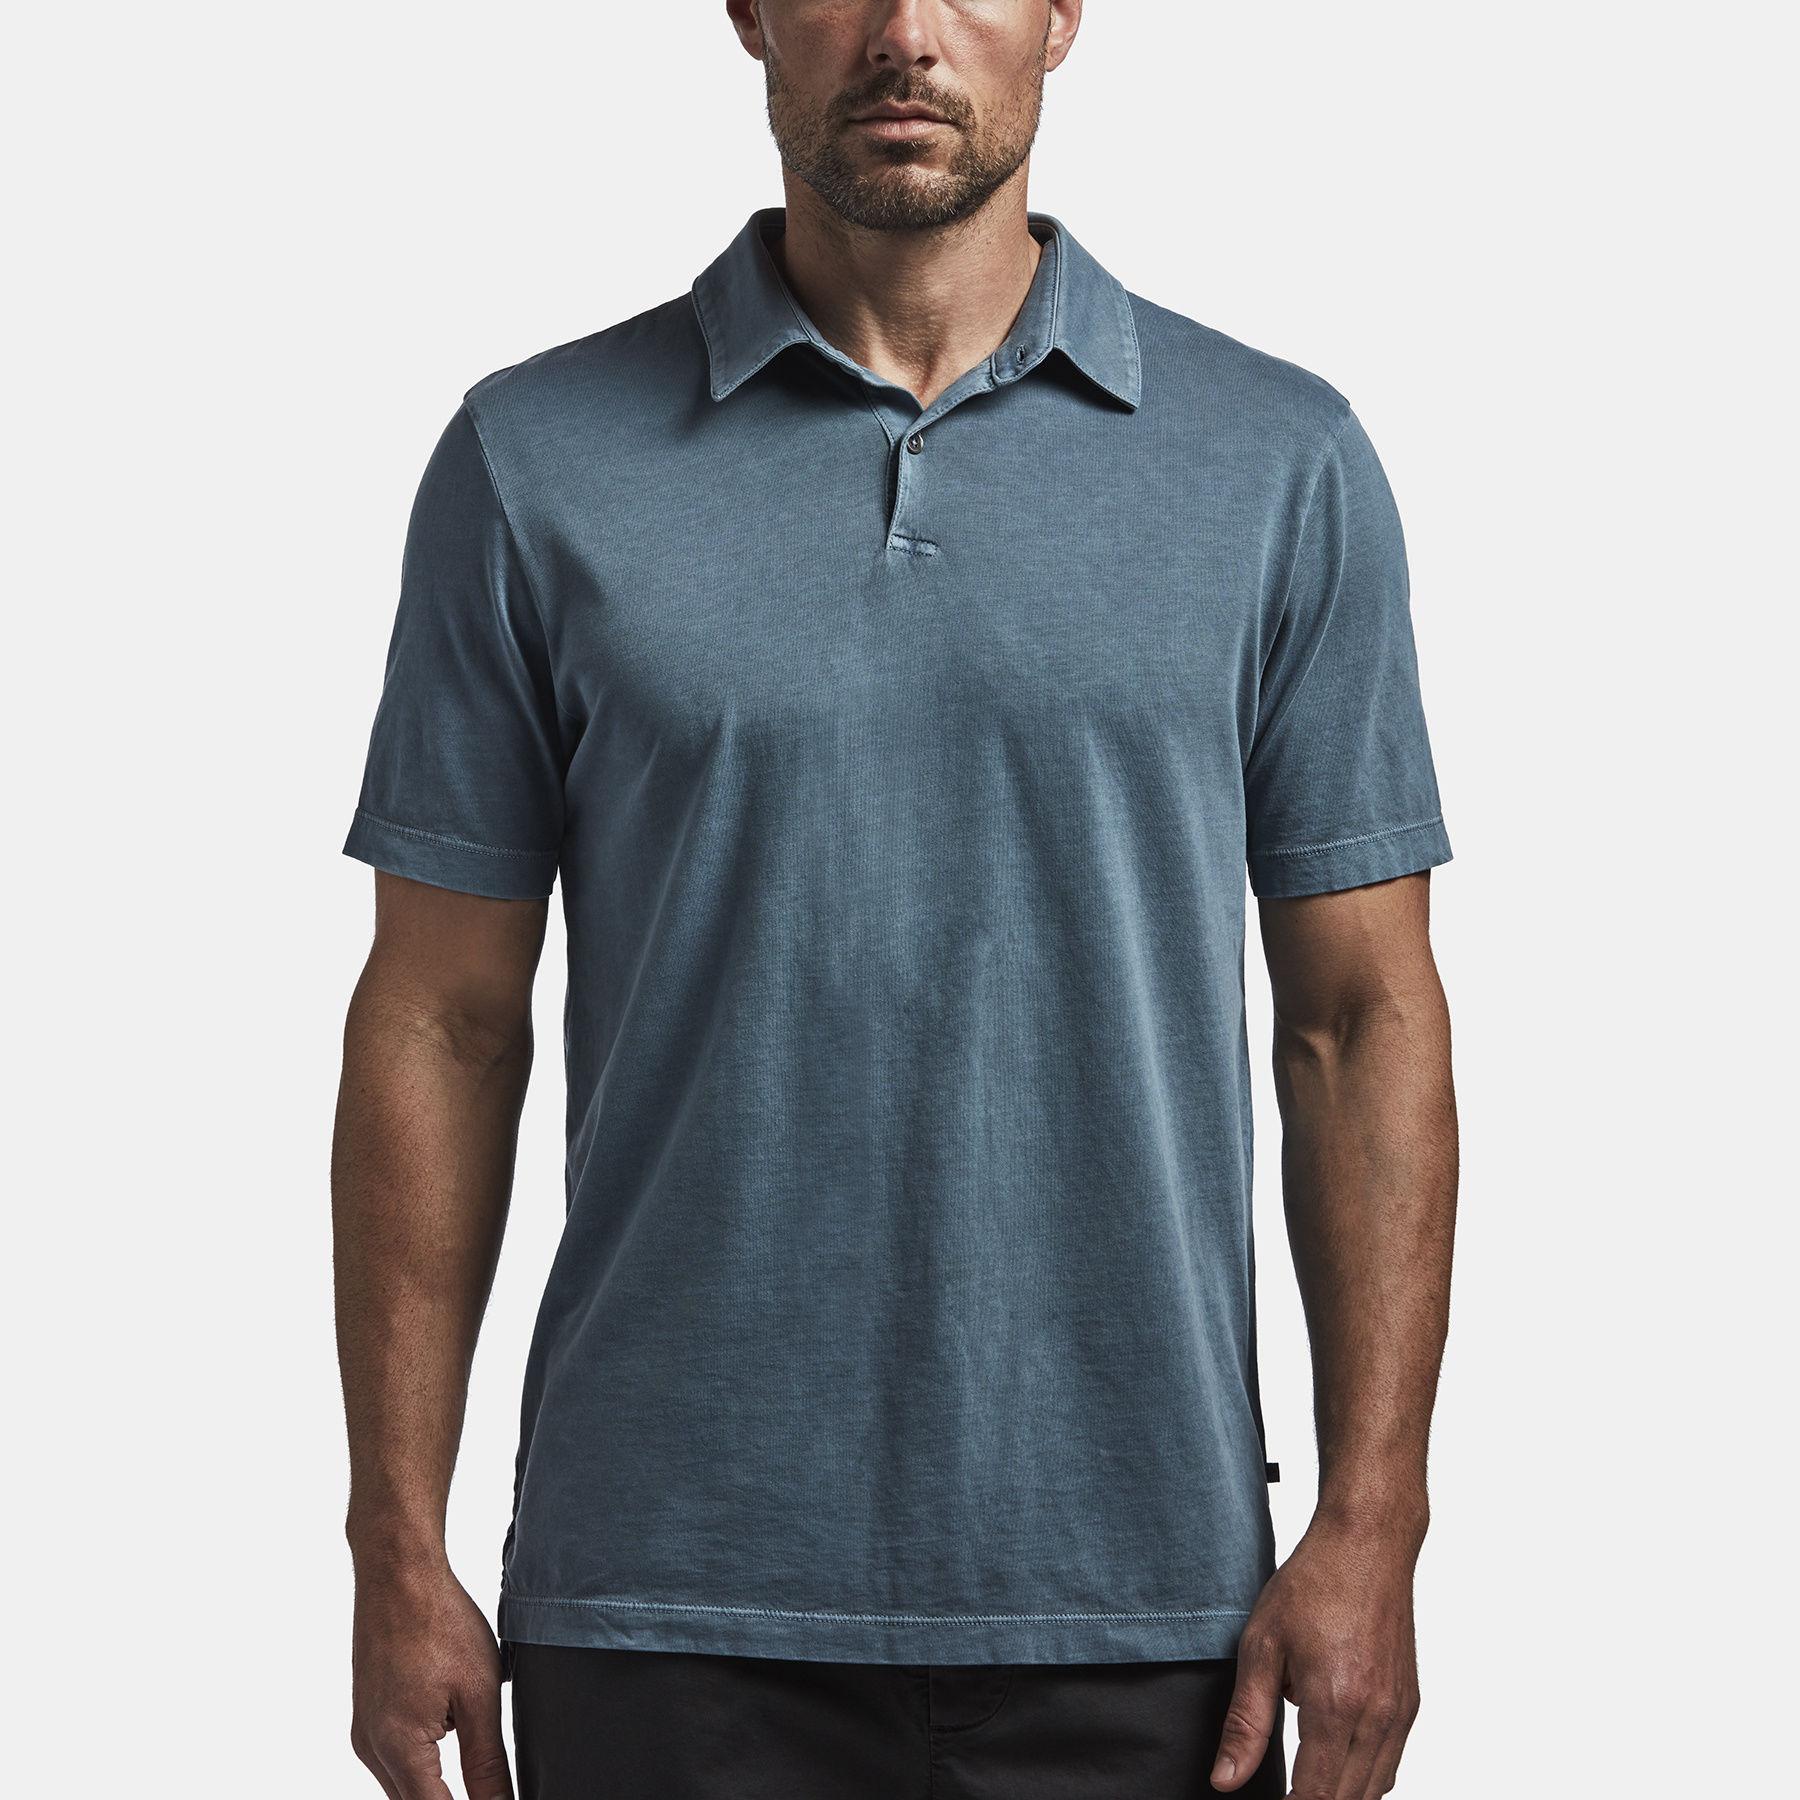 James Perse Sueded Jersey Polo in Blue for Men - Lyst